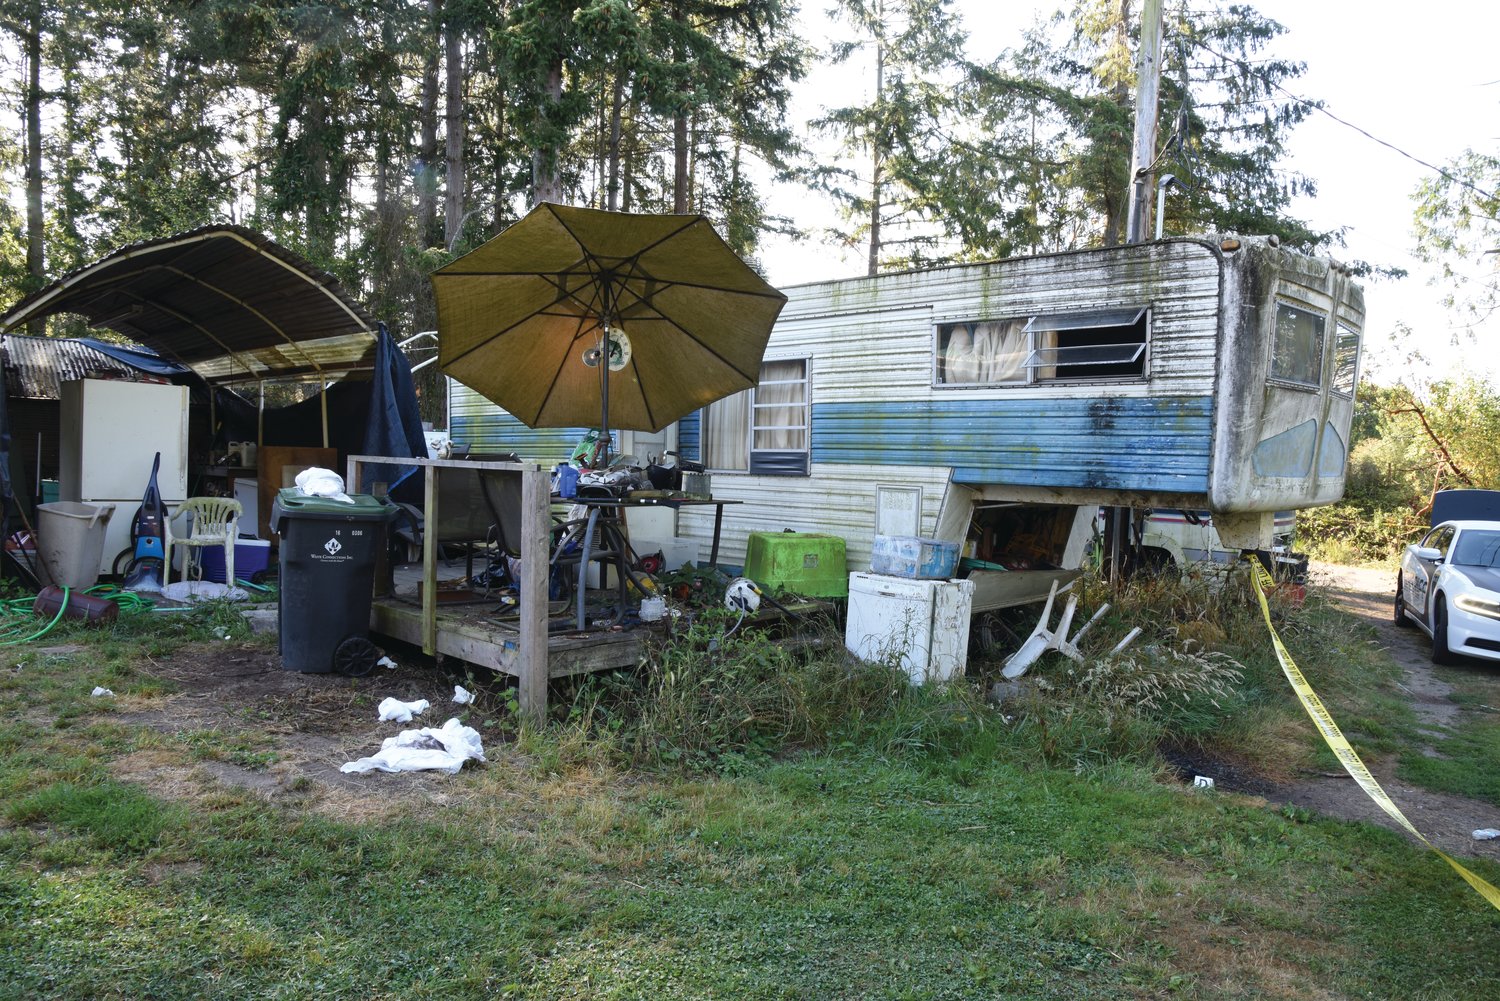 Beckmeyer’s fifth-wheel trailer on Griffith Point Road in Nordland. Beckmeyer fired a .22-caliber pistol out of the window at the right of the trailer, striking McDonald twice in the chest and killing him.